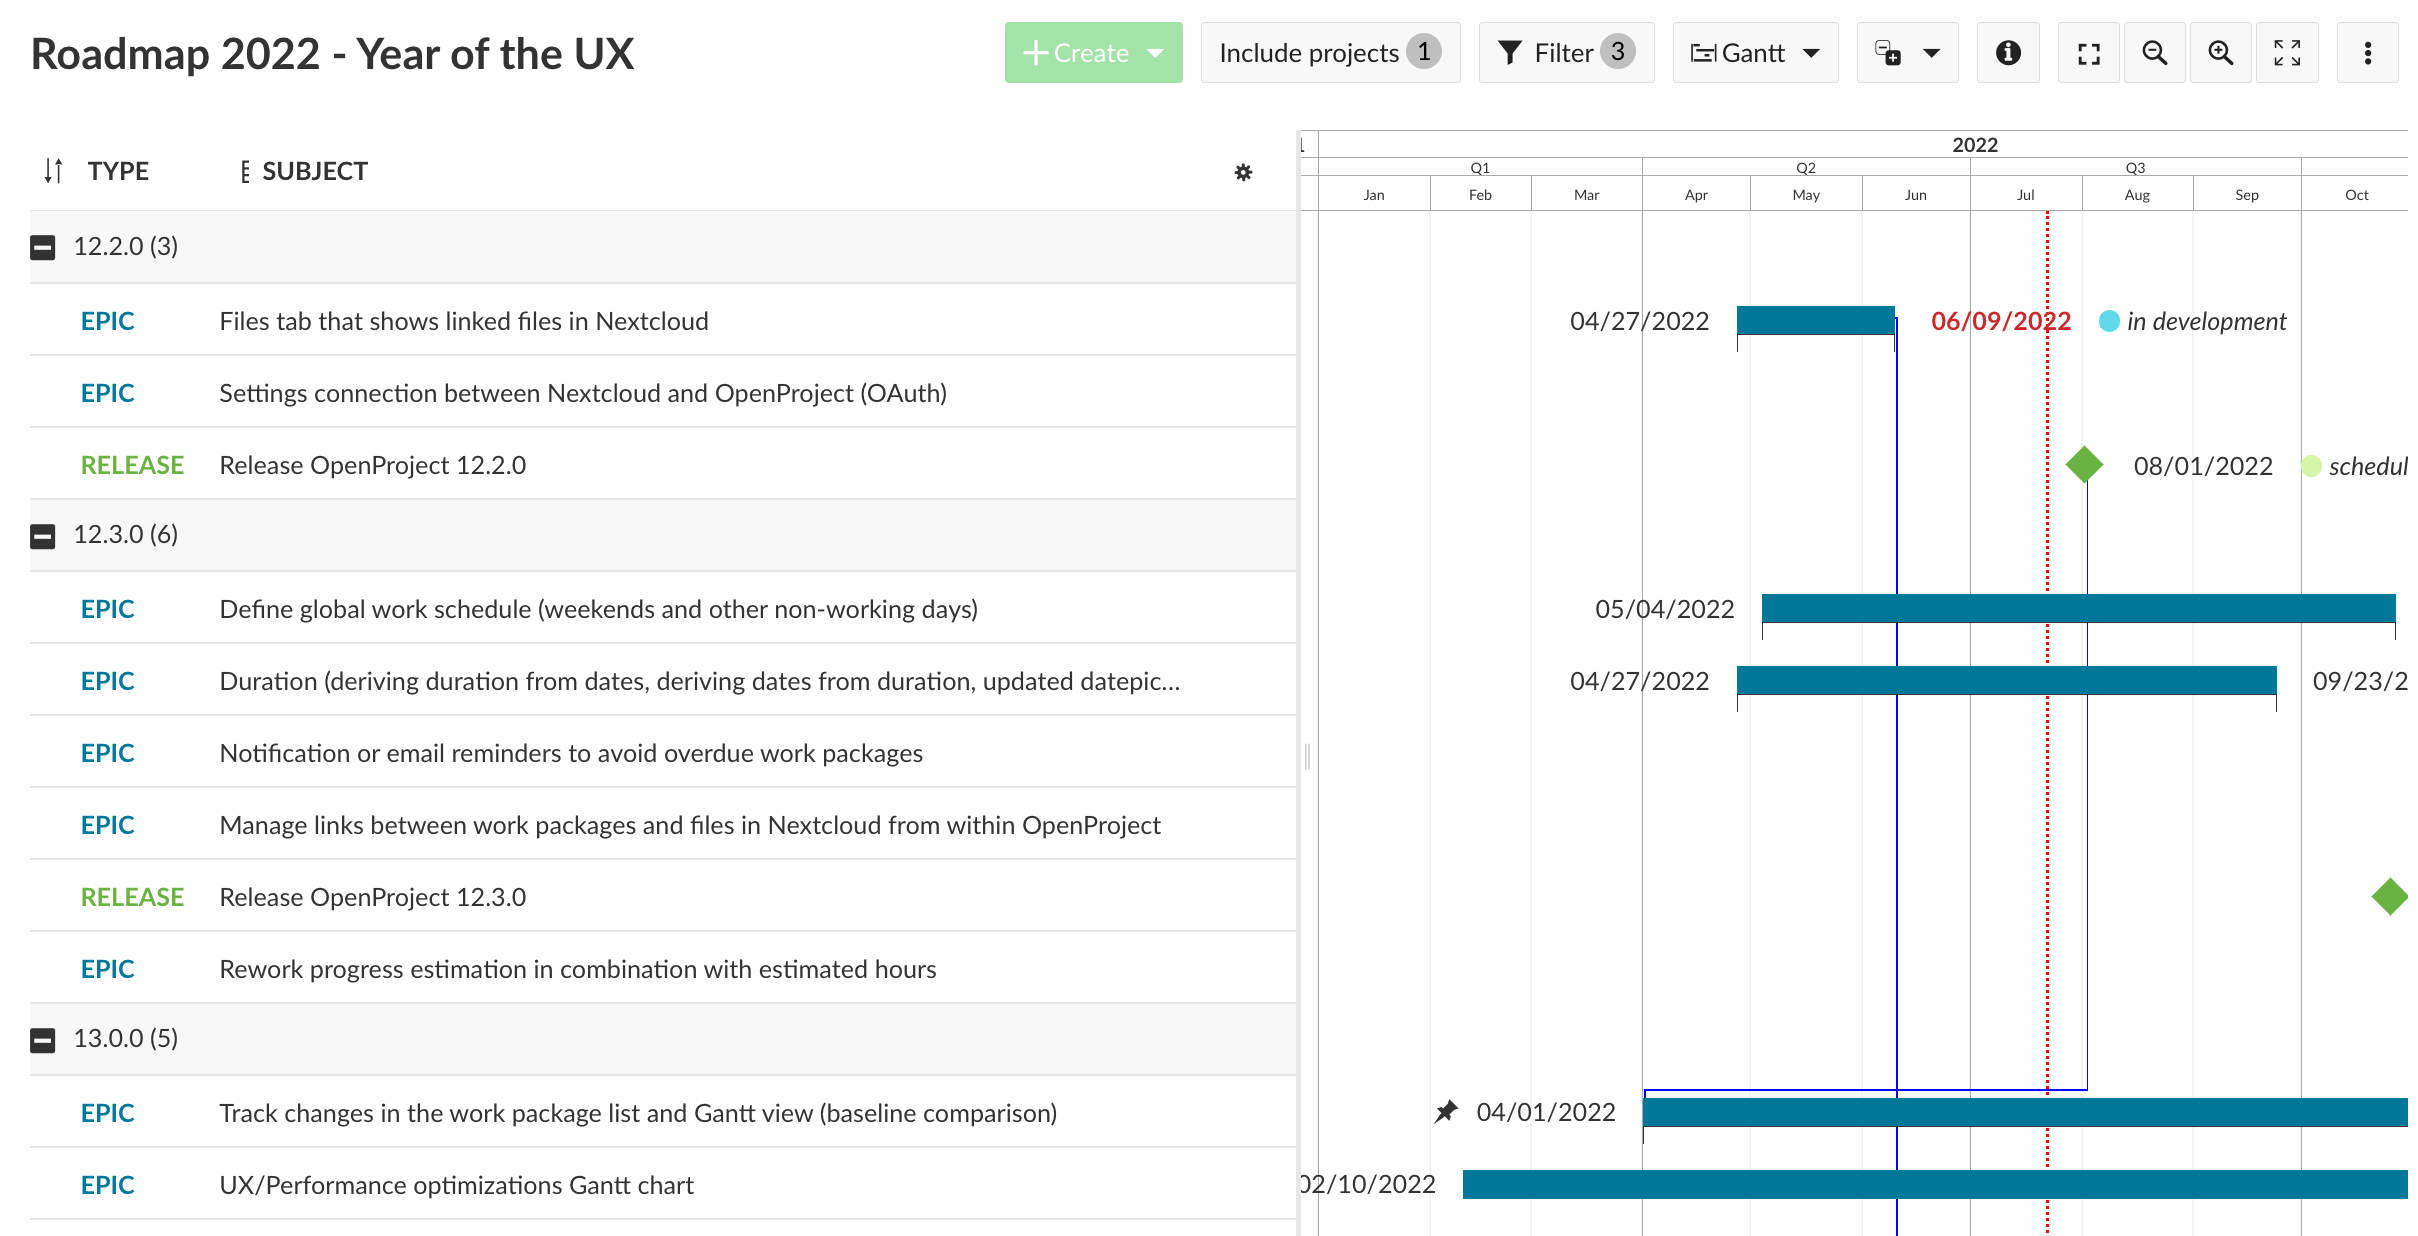 Gantt chart with epics and releases scheduled